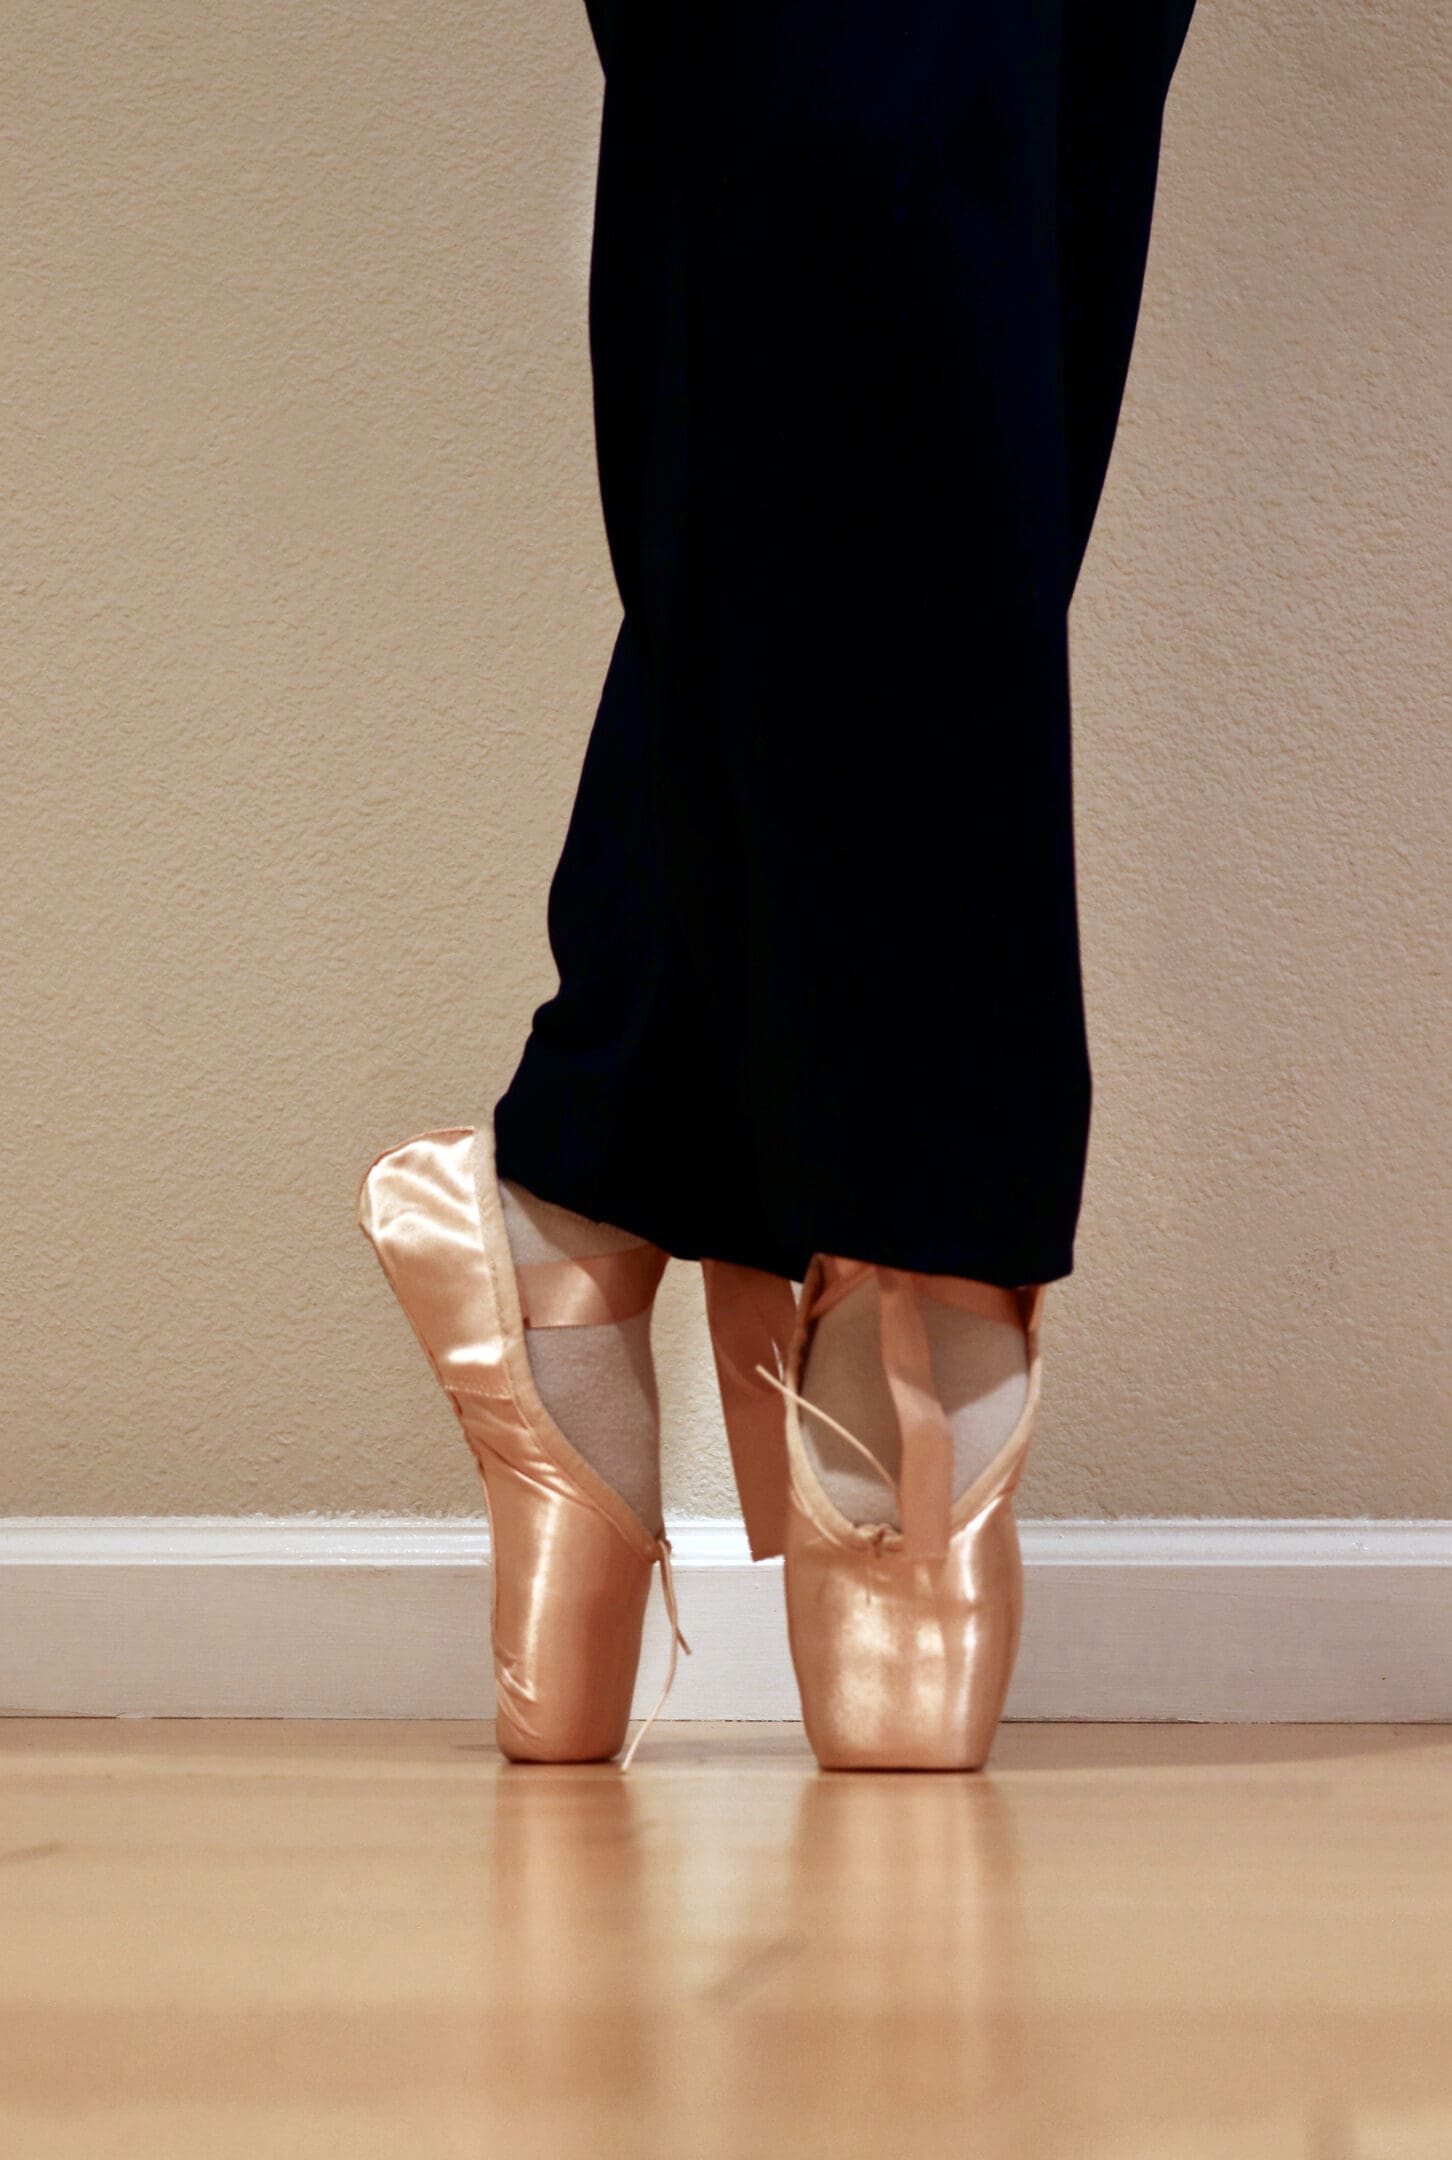 A person standing on the floor with their feet in pointe shoes.